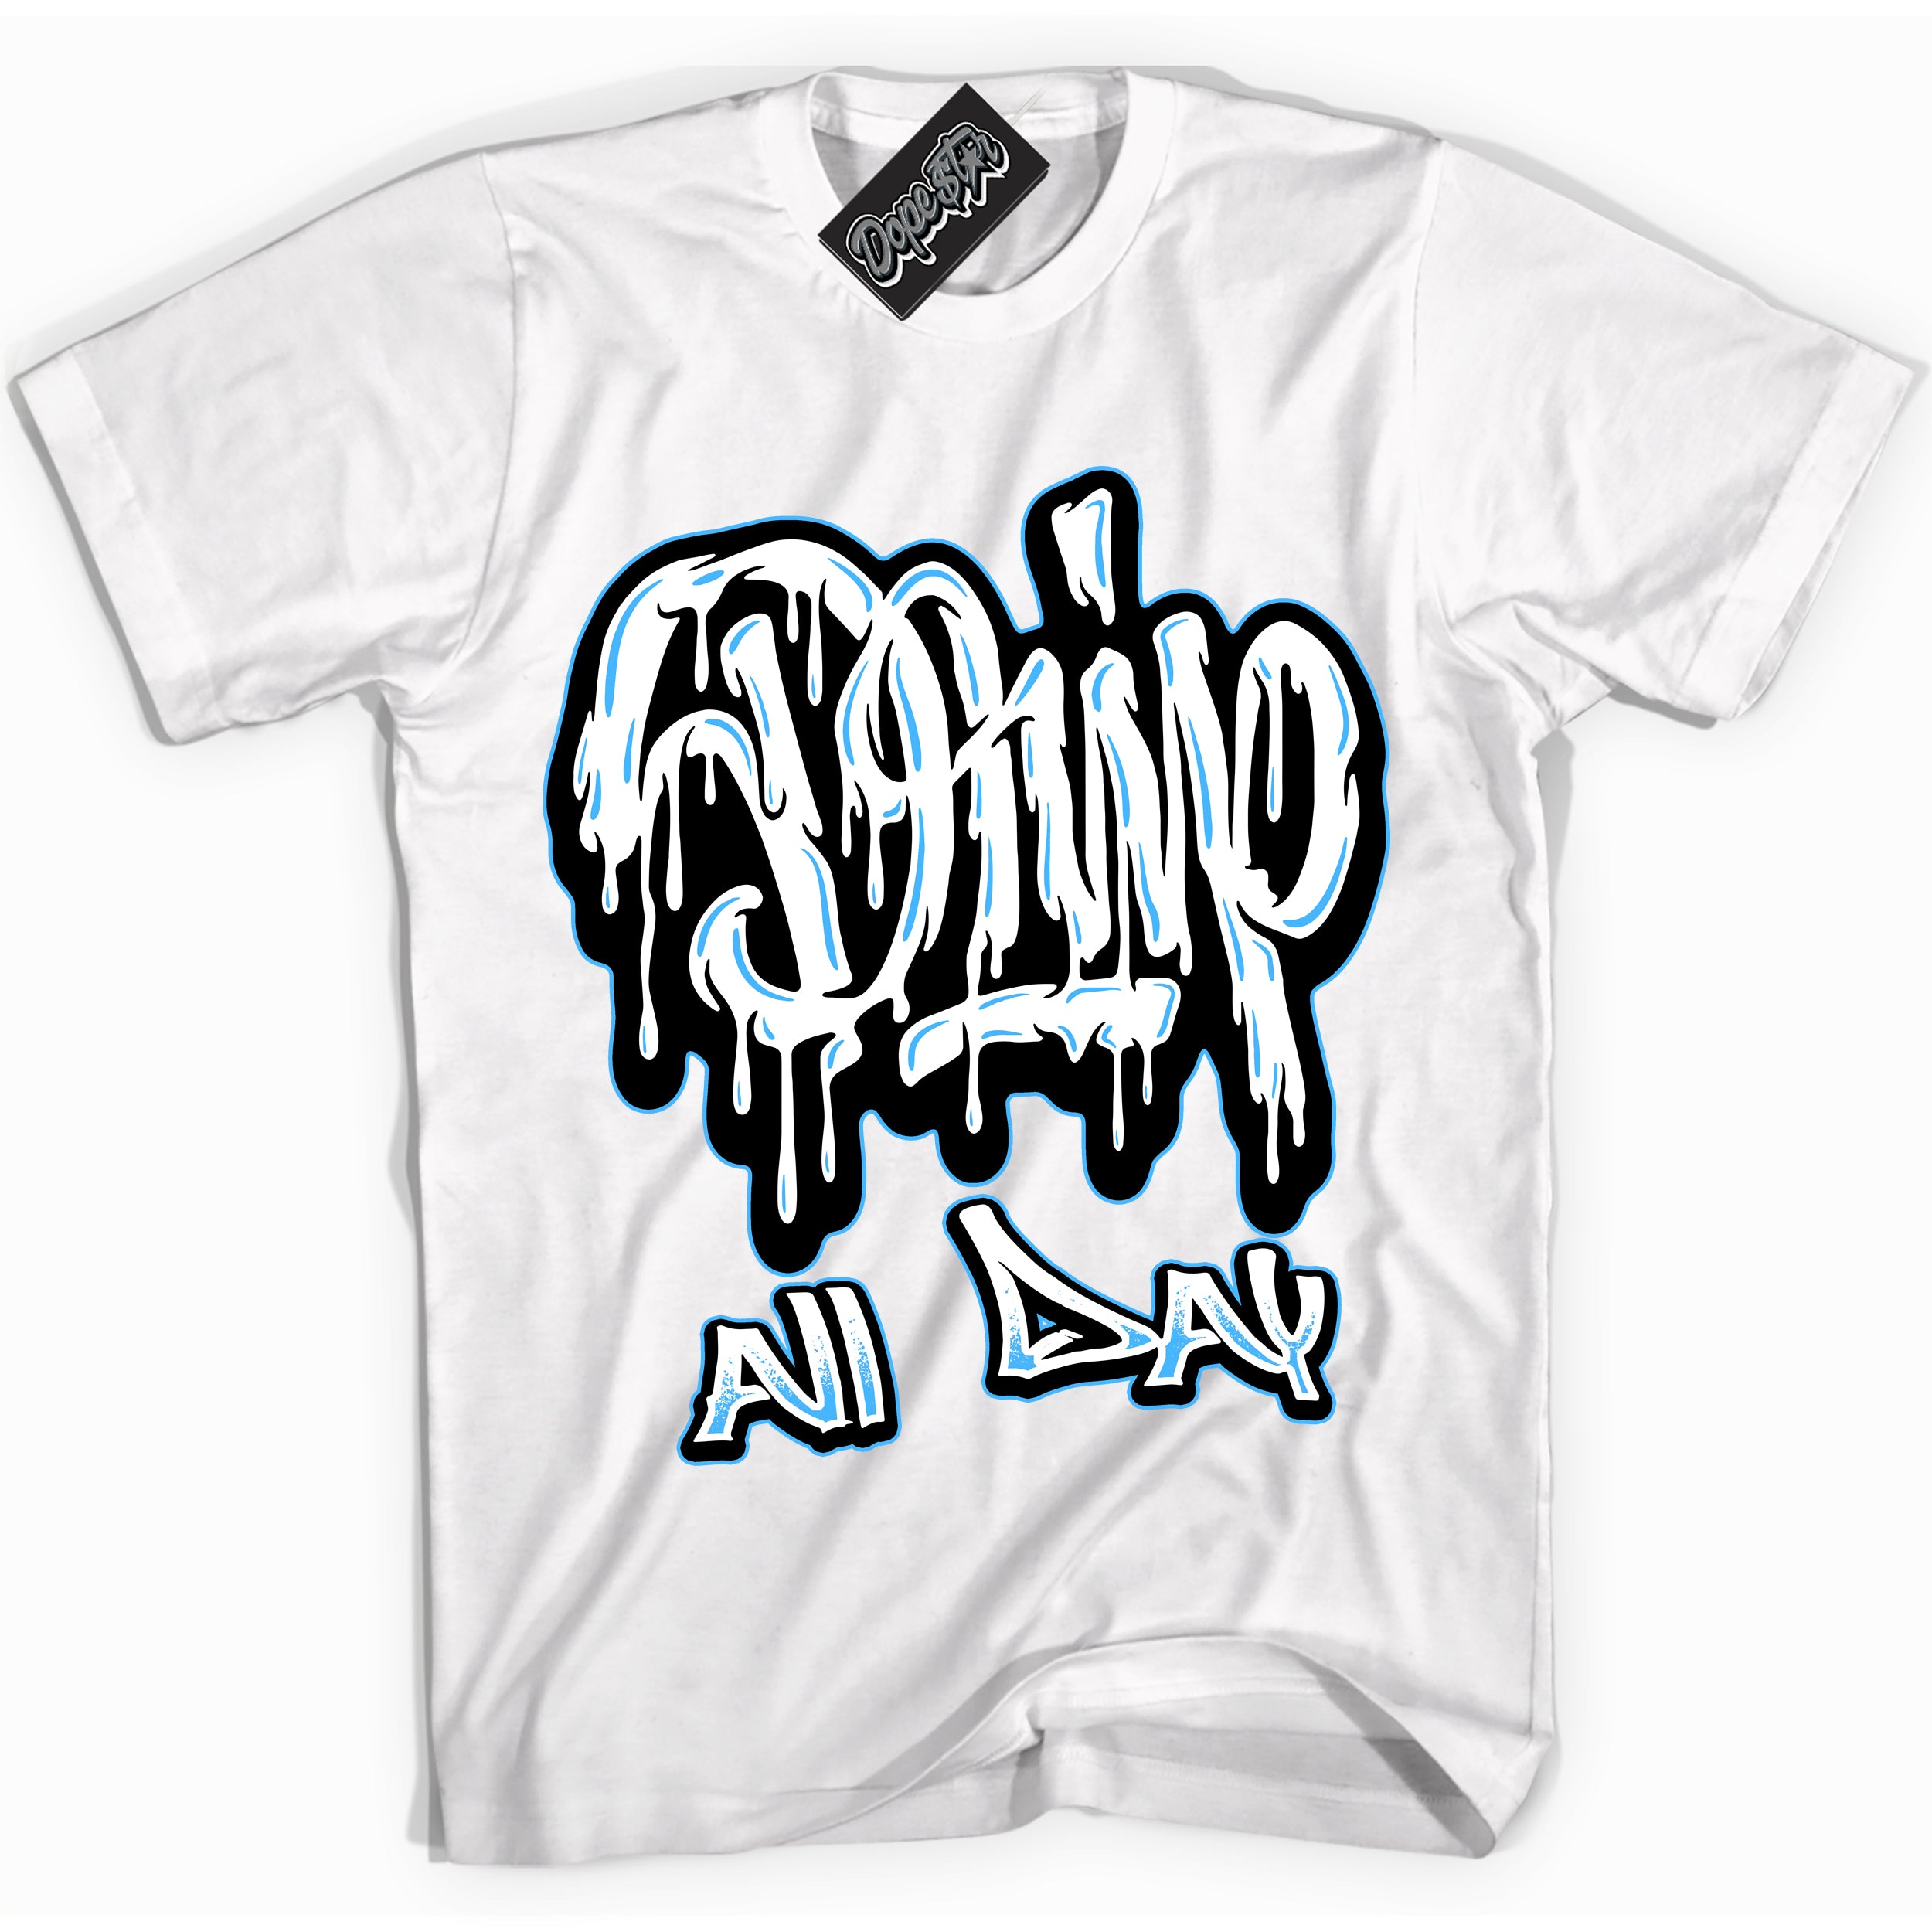 Cool White graphic tee with “ Drip All Day ” design, that perfectly matches Powder Blue 9s sneakers 